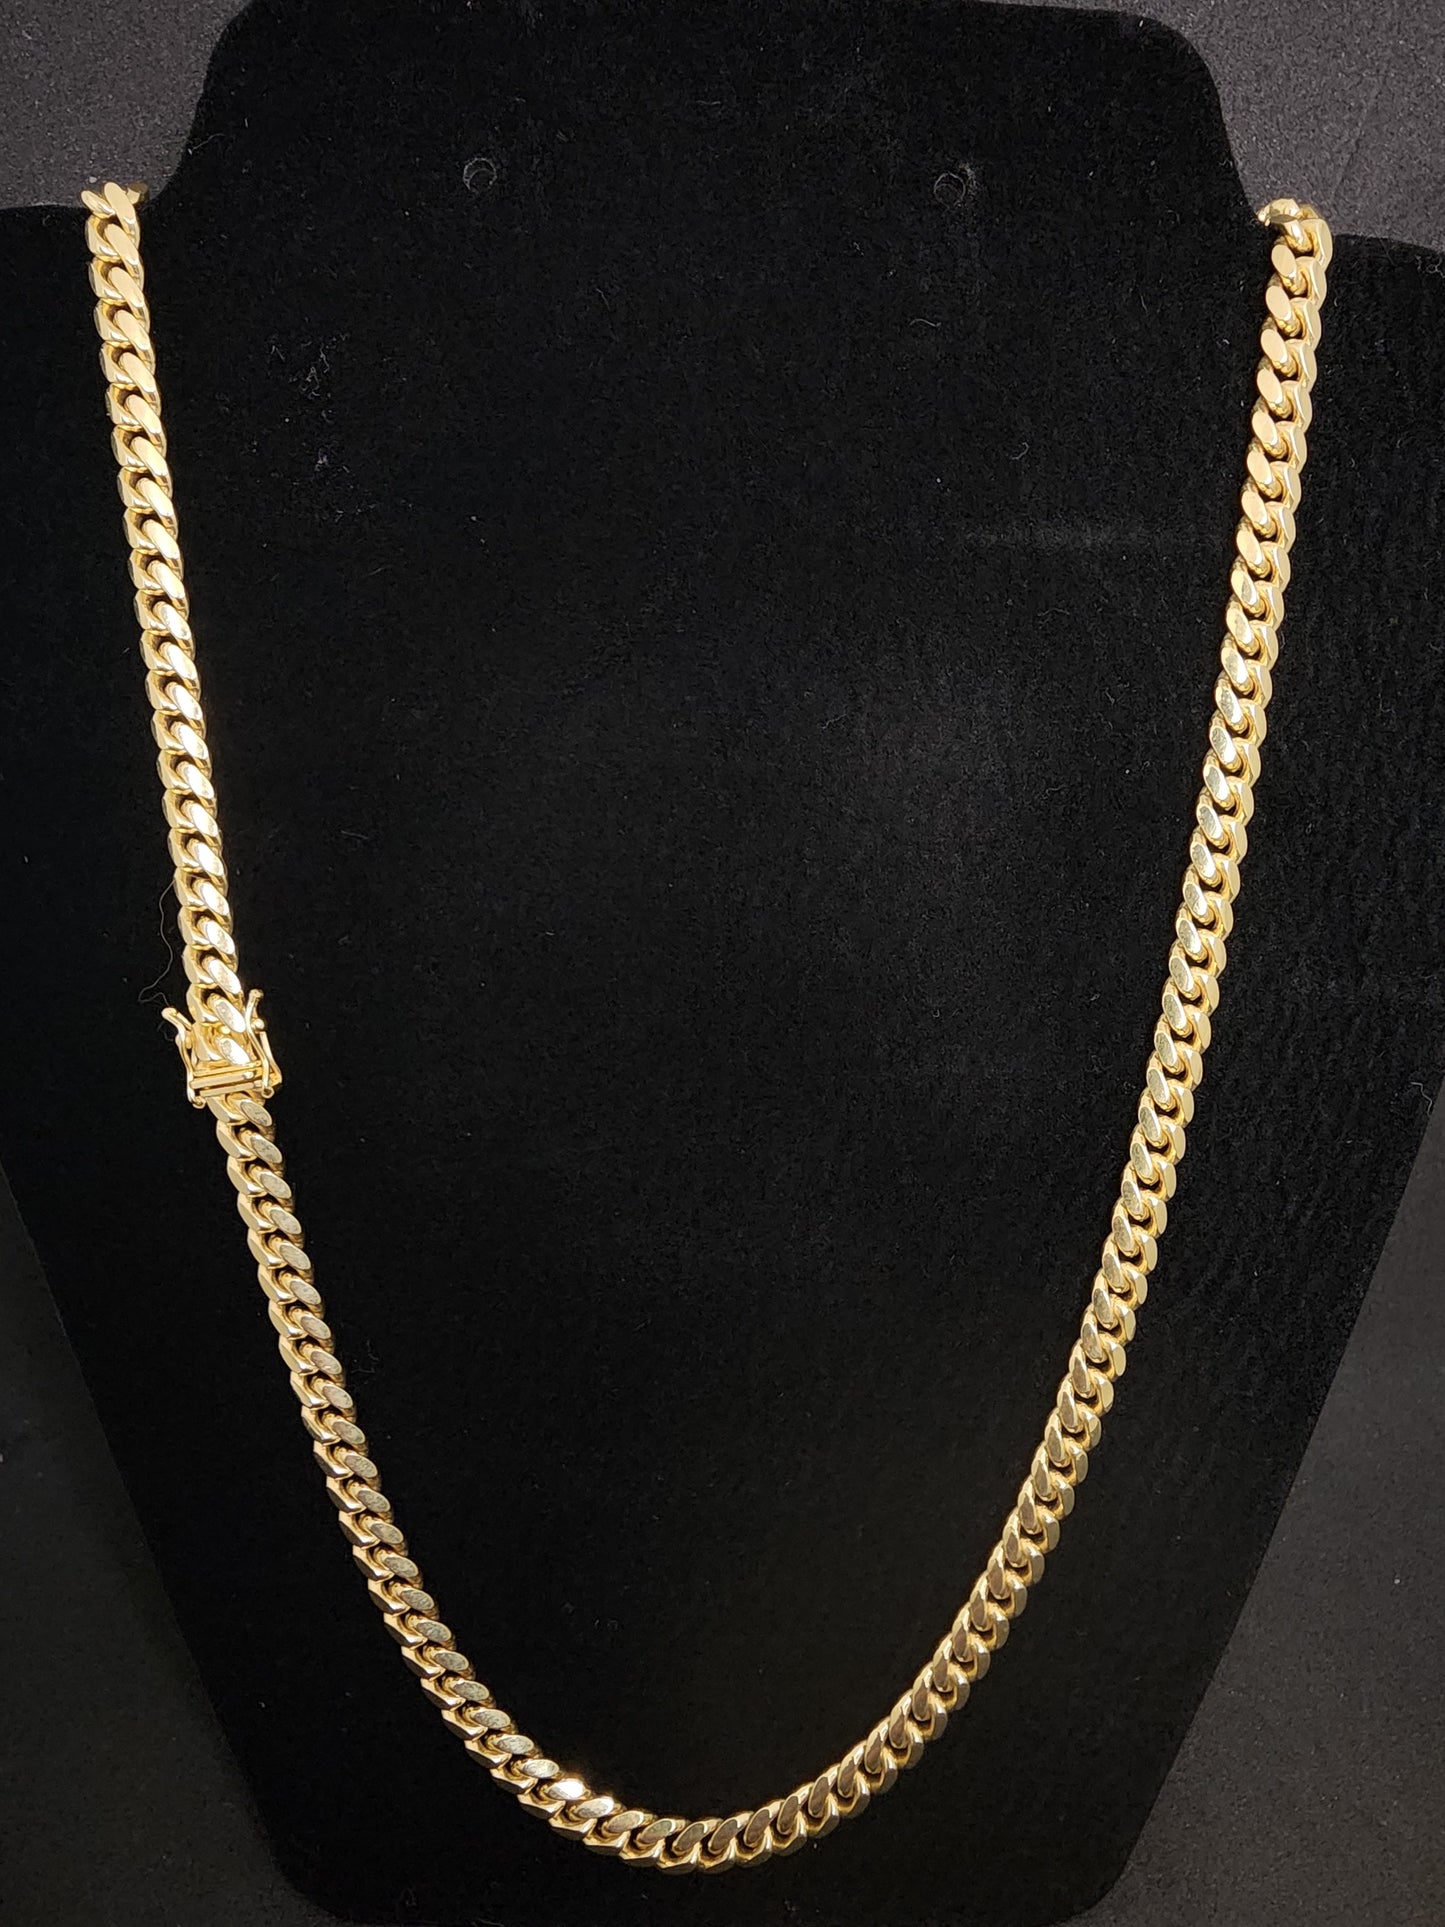 Miami Cuban Necklace - 10k Solid Yellow Gold - 22 in - 6mm